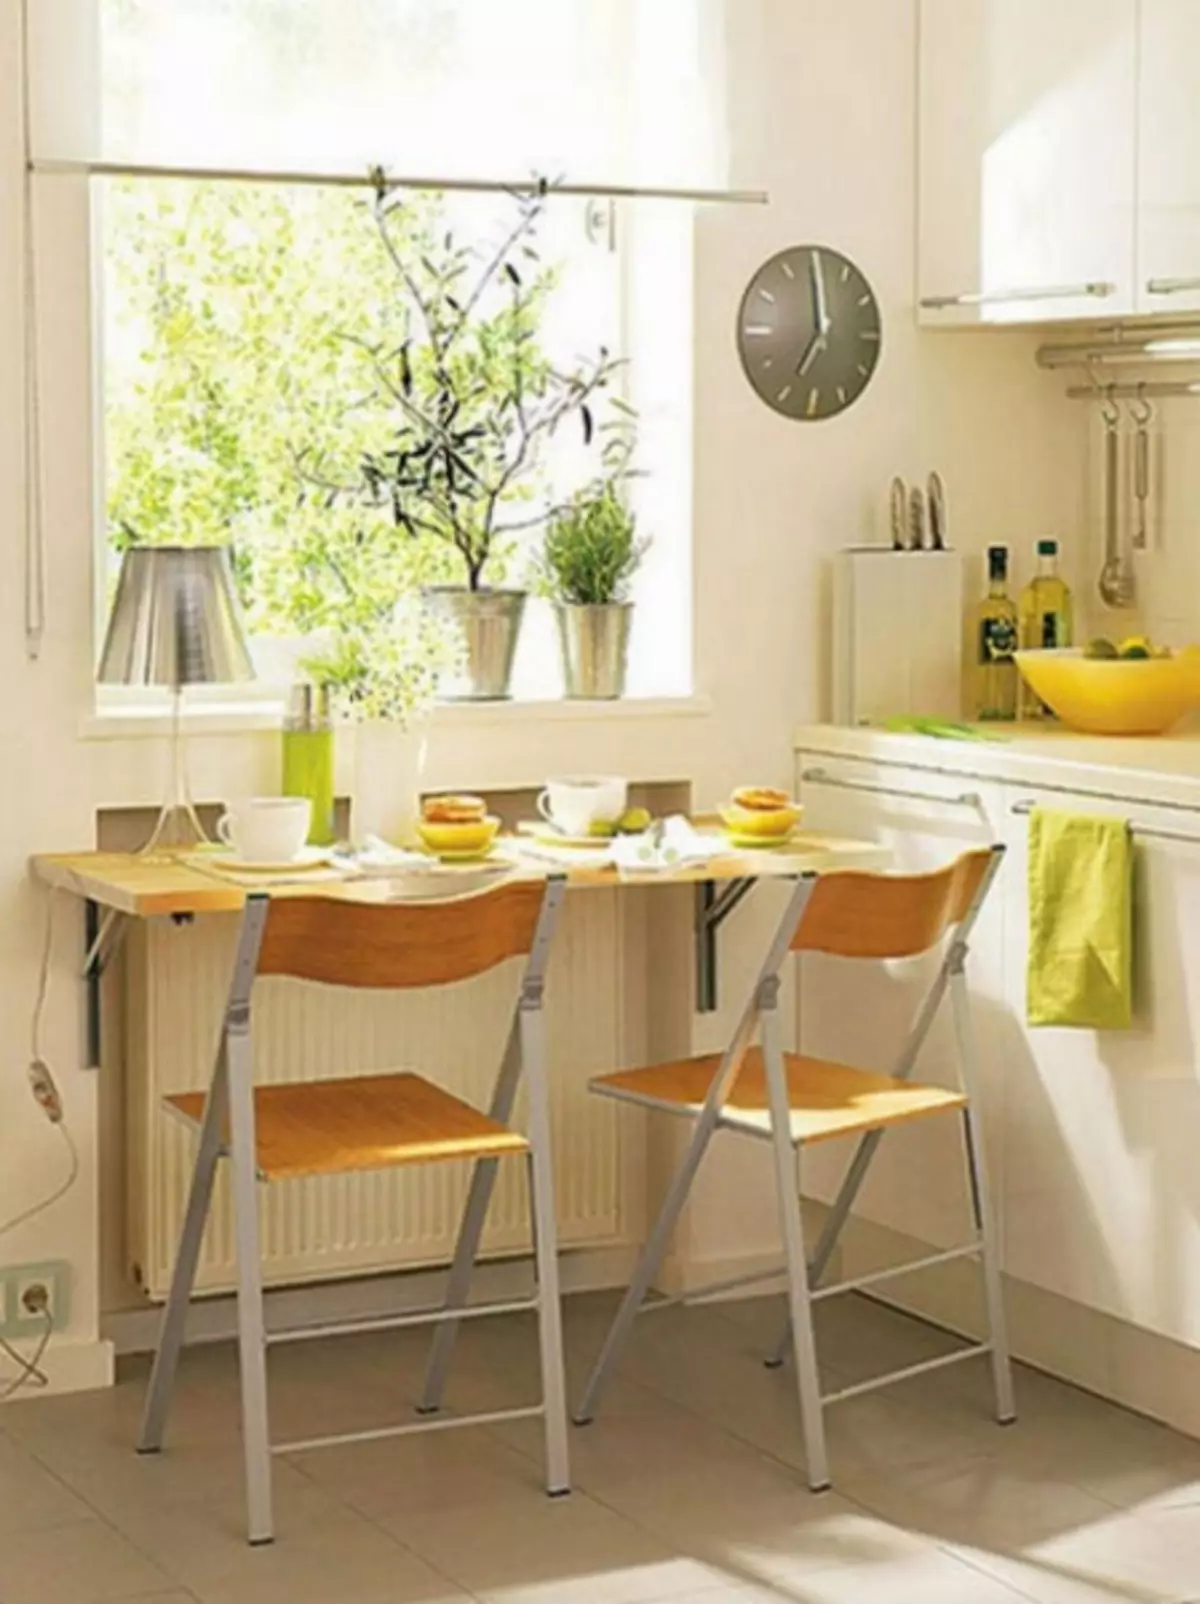 How to use a window sill in the kitchen (65 photos)